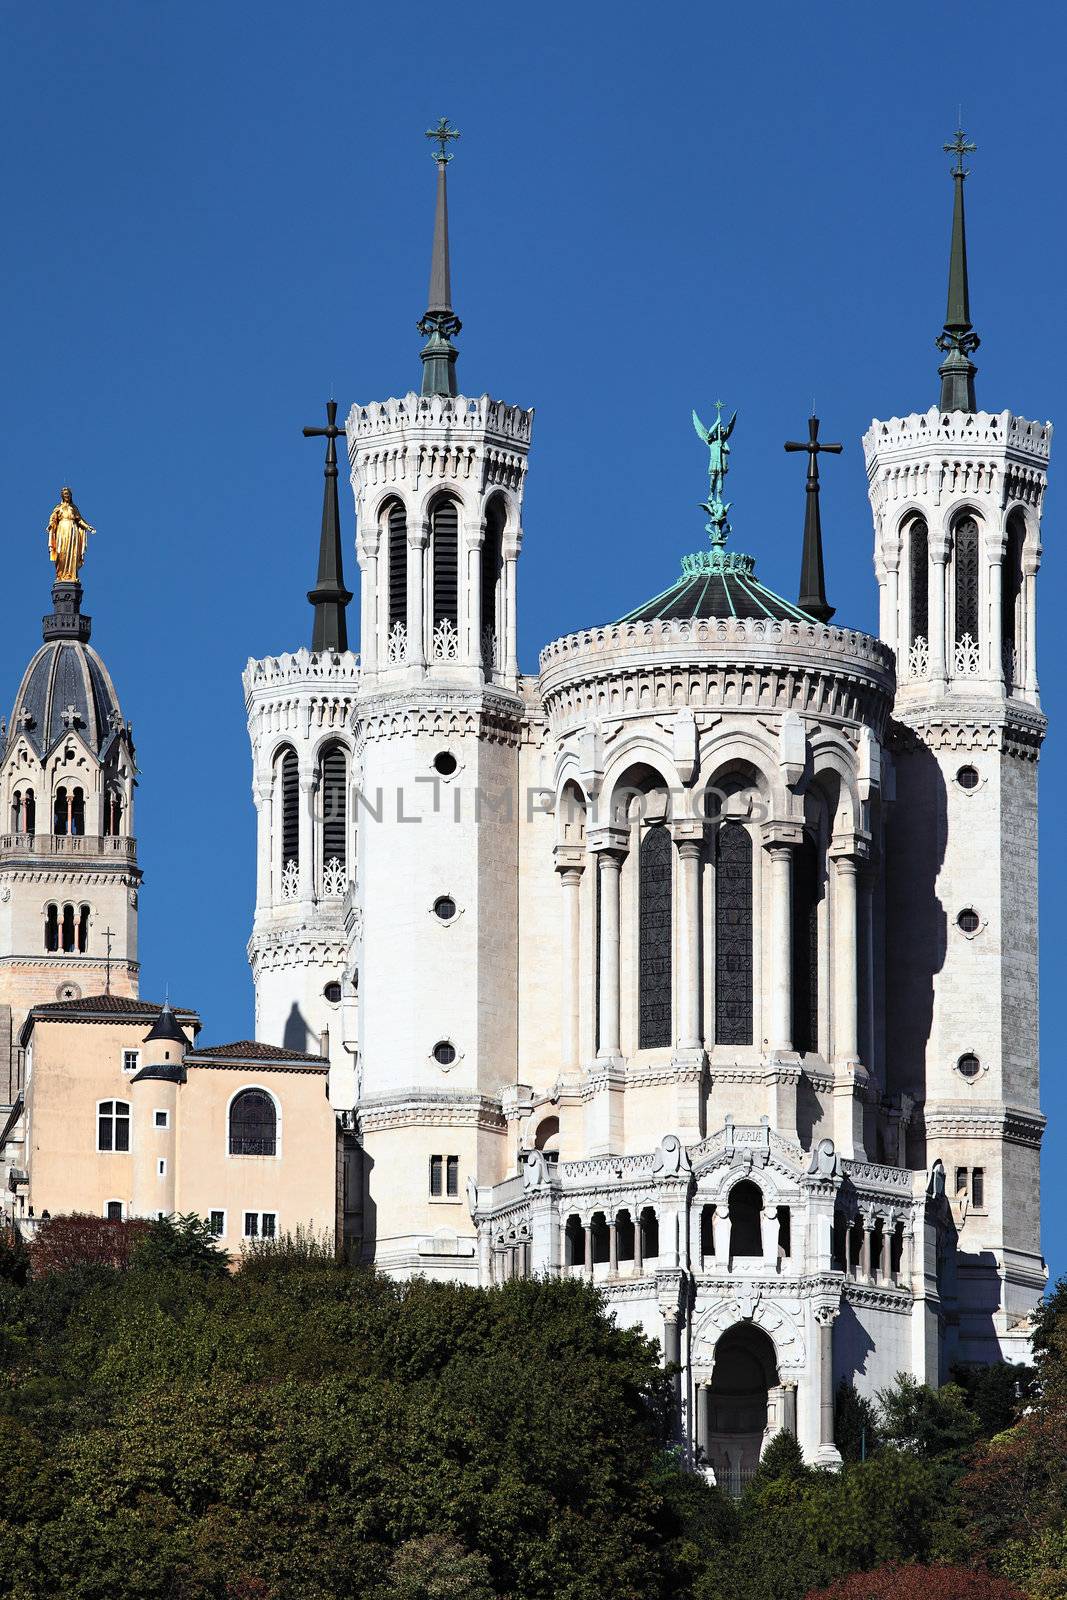 Lyon basilica and statue in the blue sky 